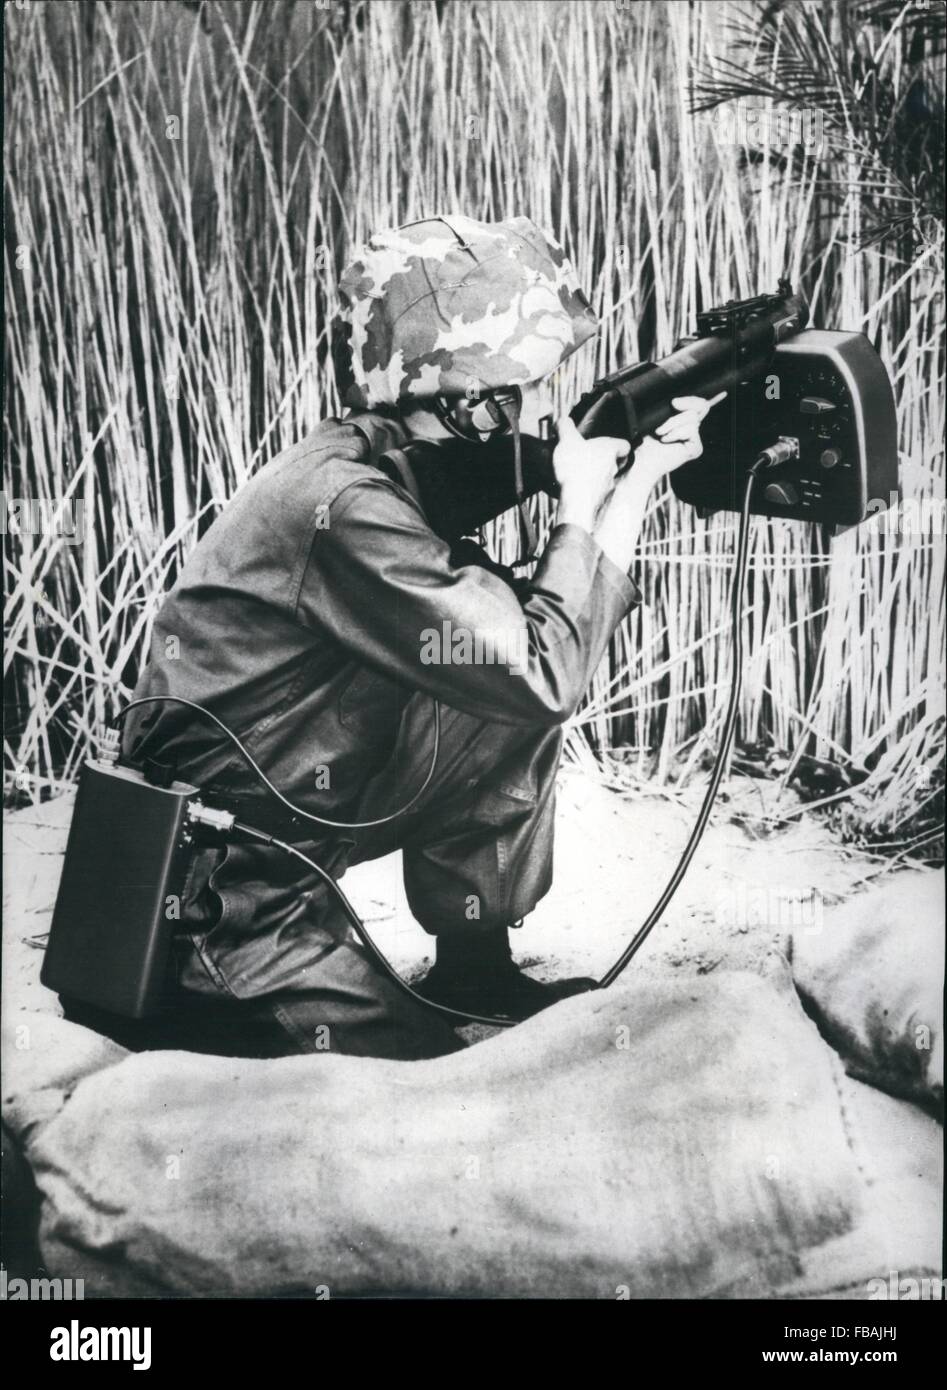 1966 - World's Smallest Radar Device Developed.: Weighing only 2 pounds a rad device has been developed for use by U.S. infantrymen. So small that if can be attached to a rifle, grenade launcher, etc. the radar is said to be of vital value in seeking cut an enemy., moving undercover of harvest field or other dense undergrowths. The lighweight device built by RCA engineers also detects movement of men, jeeps trucks, and tanks by night. Photo shows. Infantryman seen using the new light weight, 2 lb. radar device. It can ''see''through the corn field. (Credit Image: © Keystone Pictures USA/ZUMAPR Stock Photo